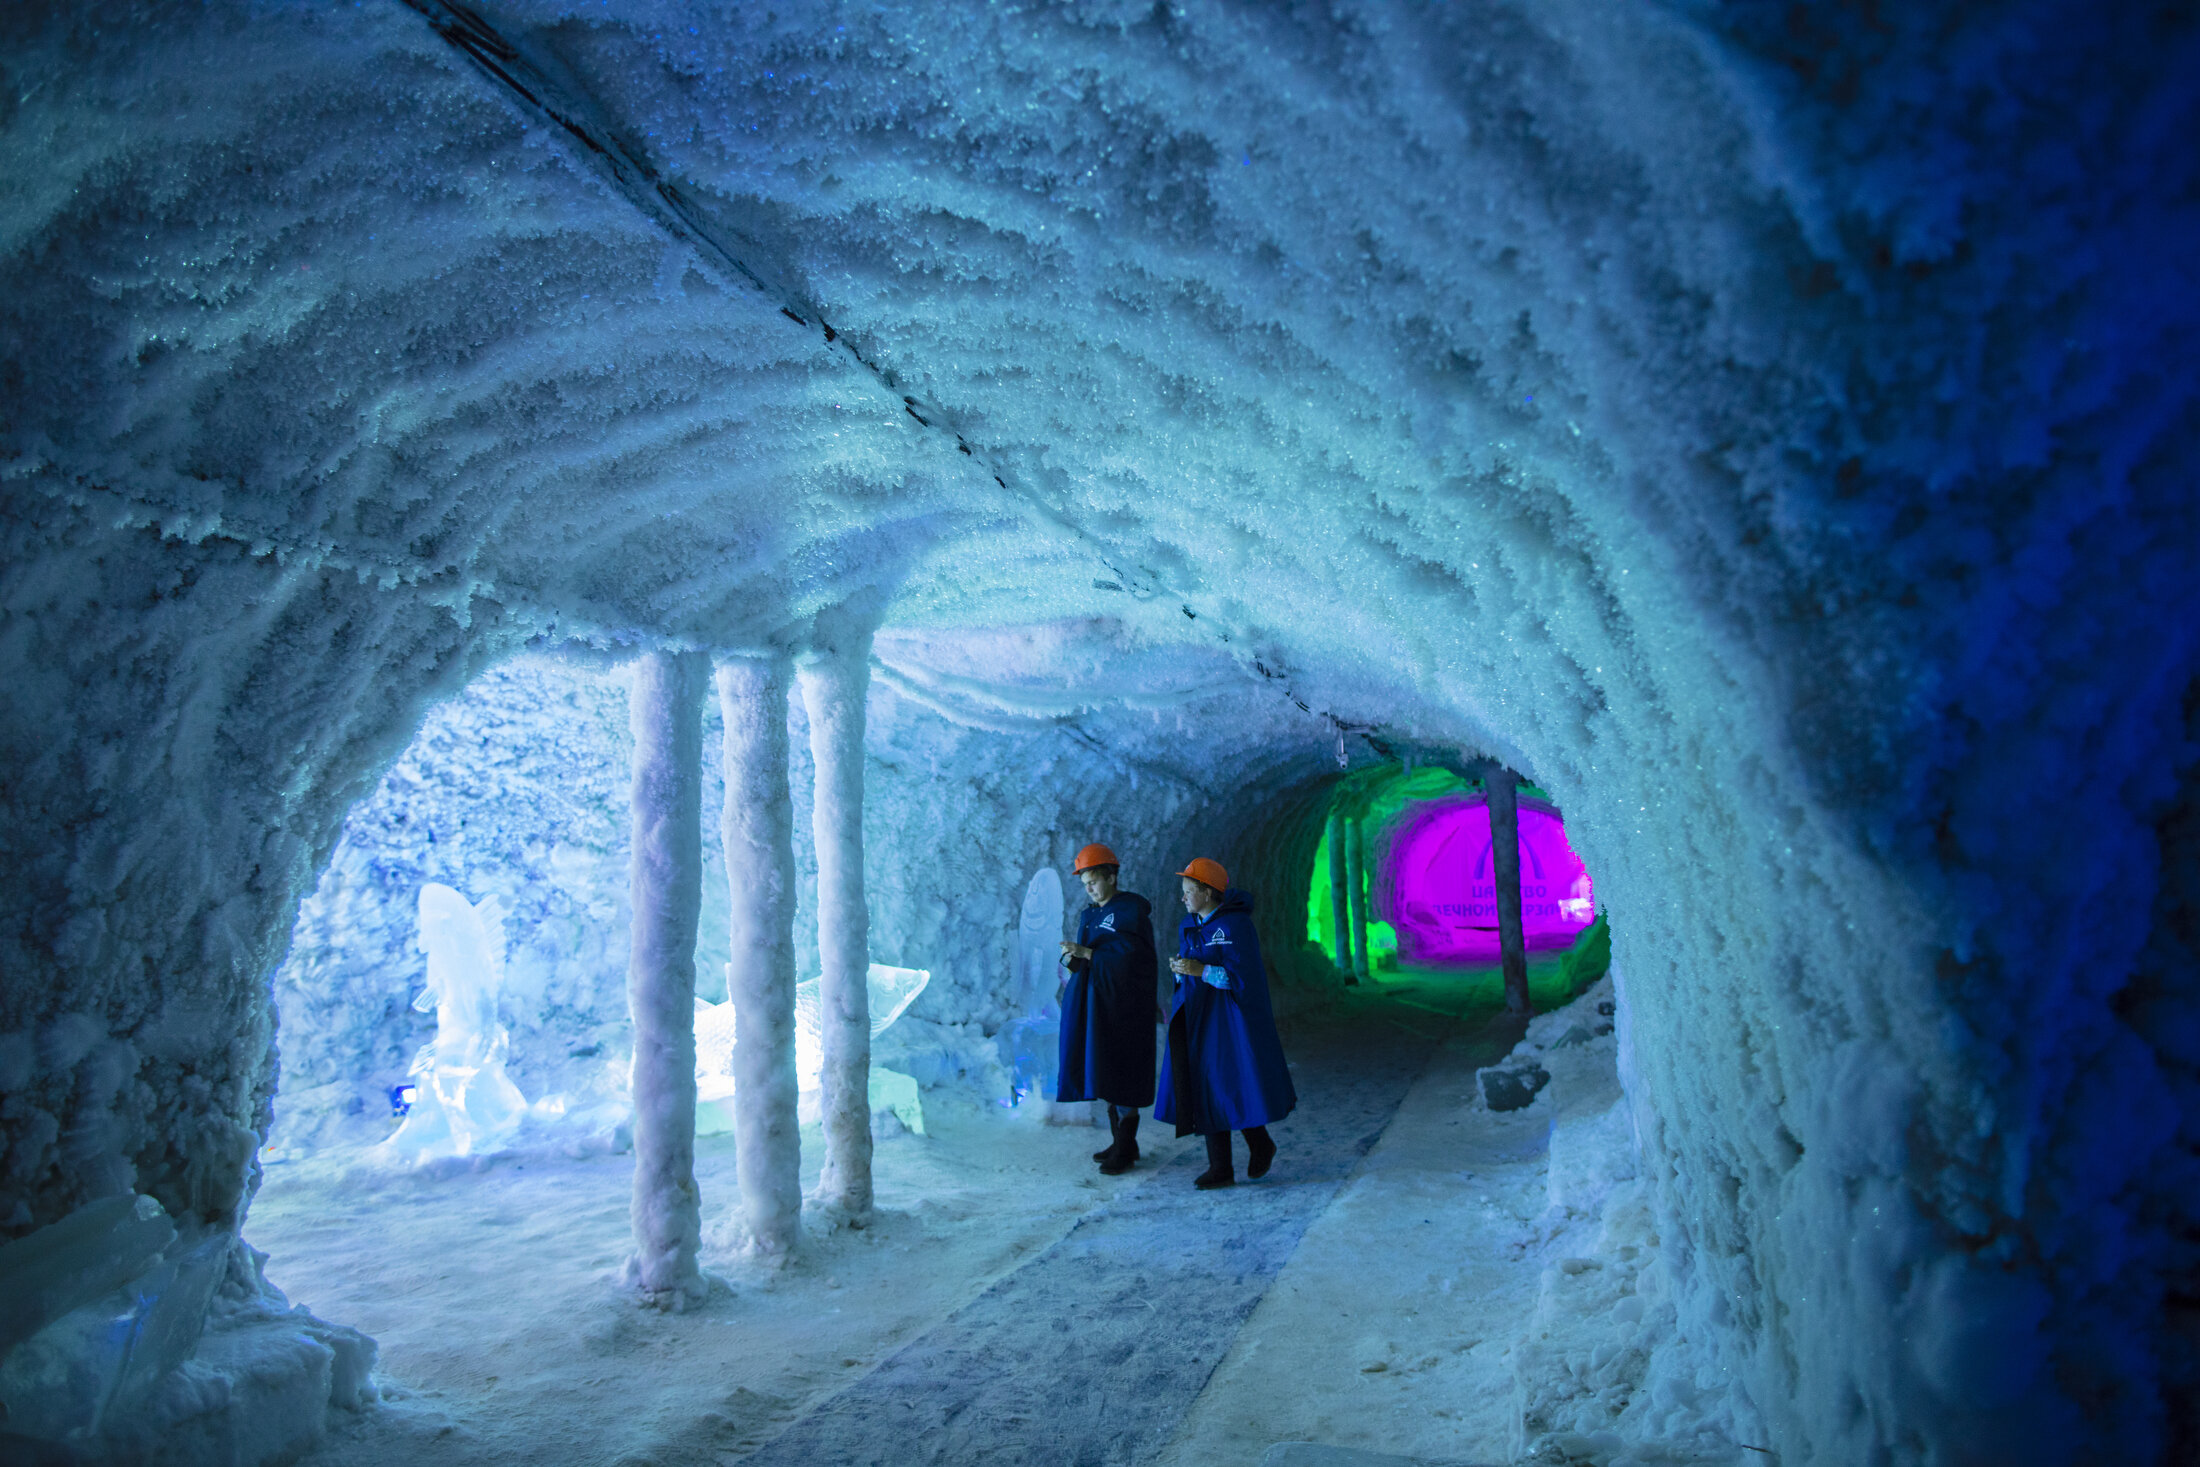  The "Kingdom of Permafrost" museum, a tourist attraction that includes walking through permafrost tunnels decorated with psychedelic lights and ice sculptures, is dug into the side of a hill on the outskirts of Yakutsk, Siberia. Yakutsk is one of th